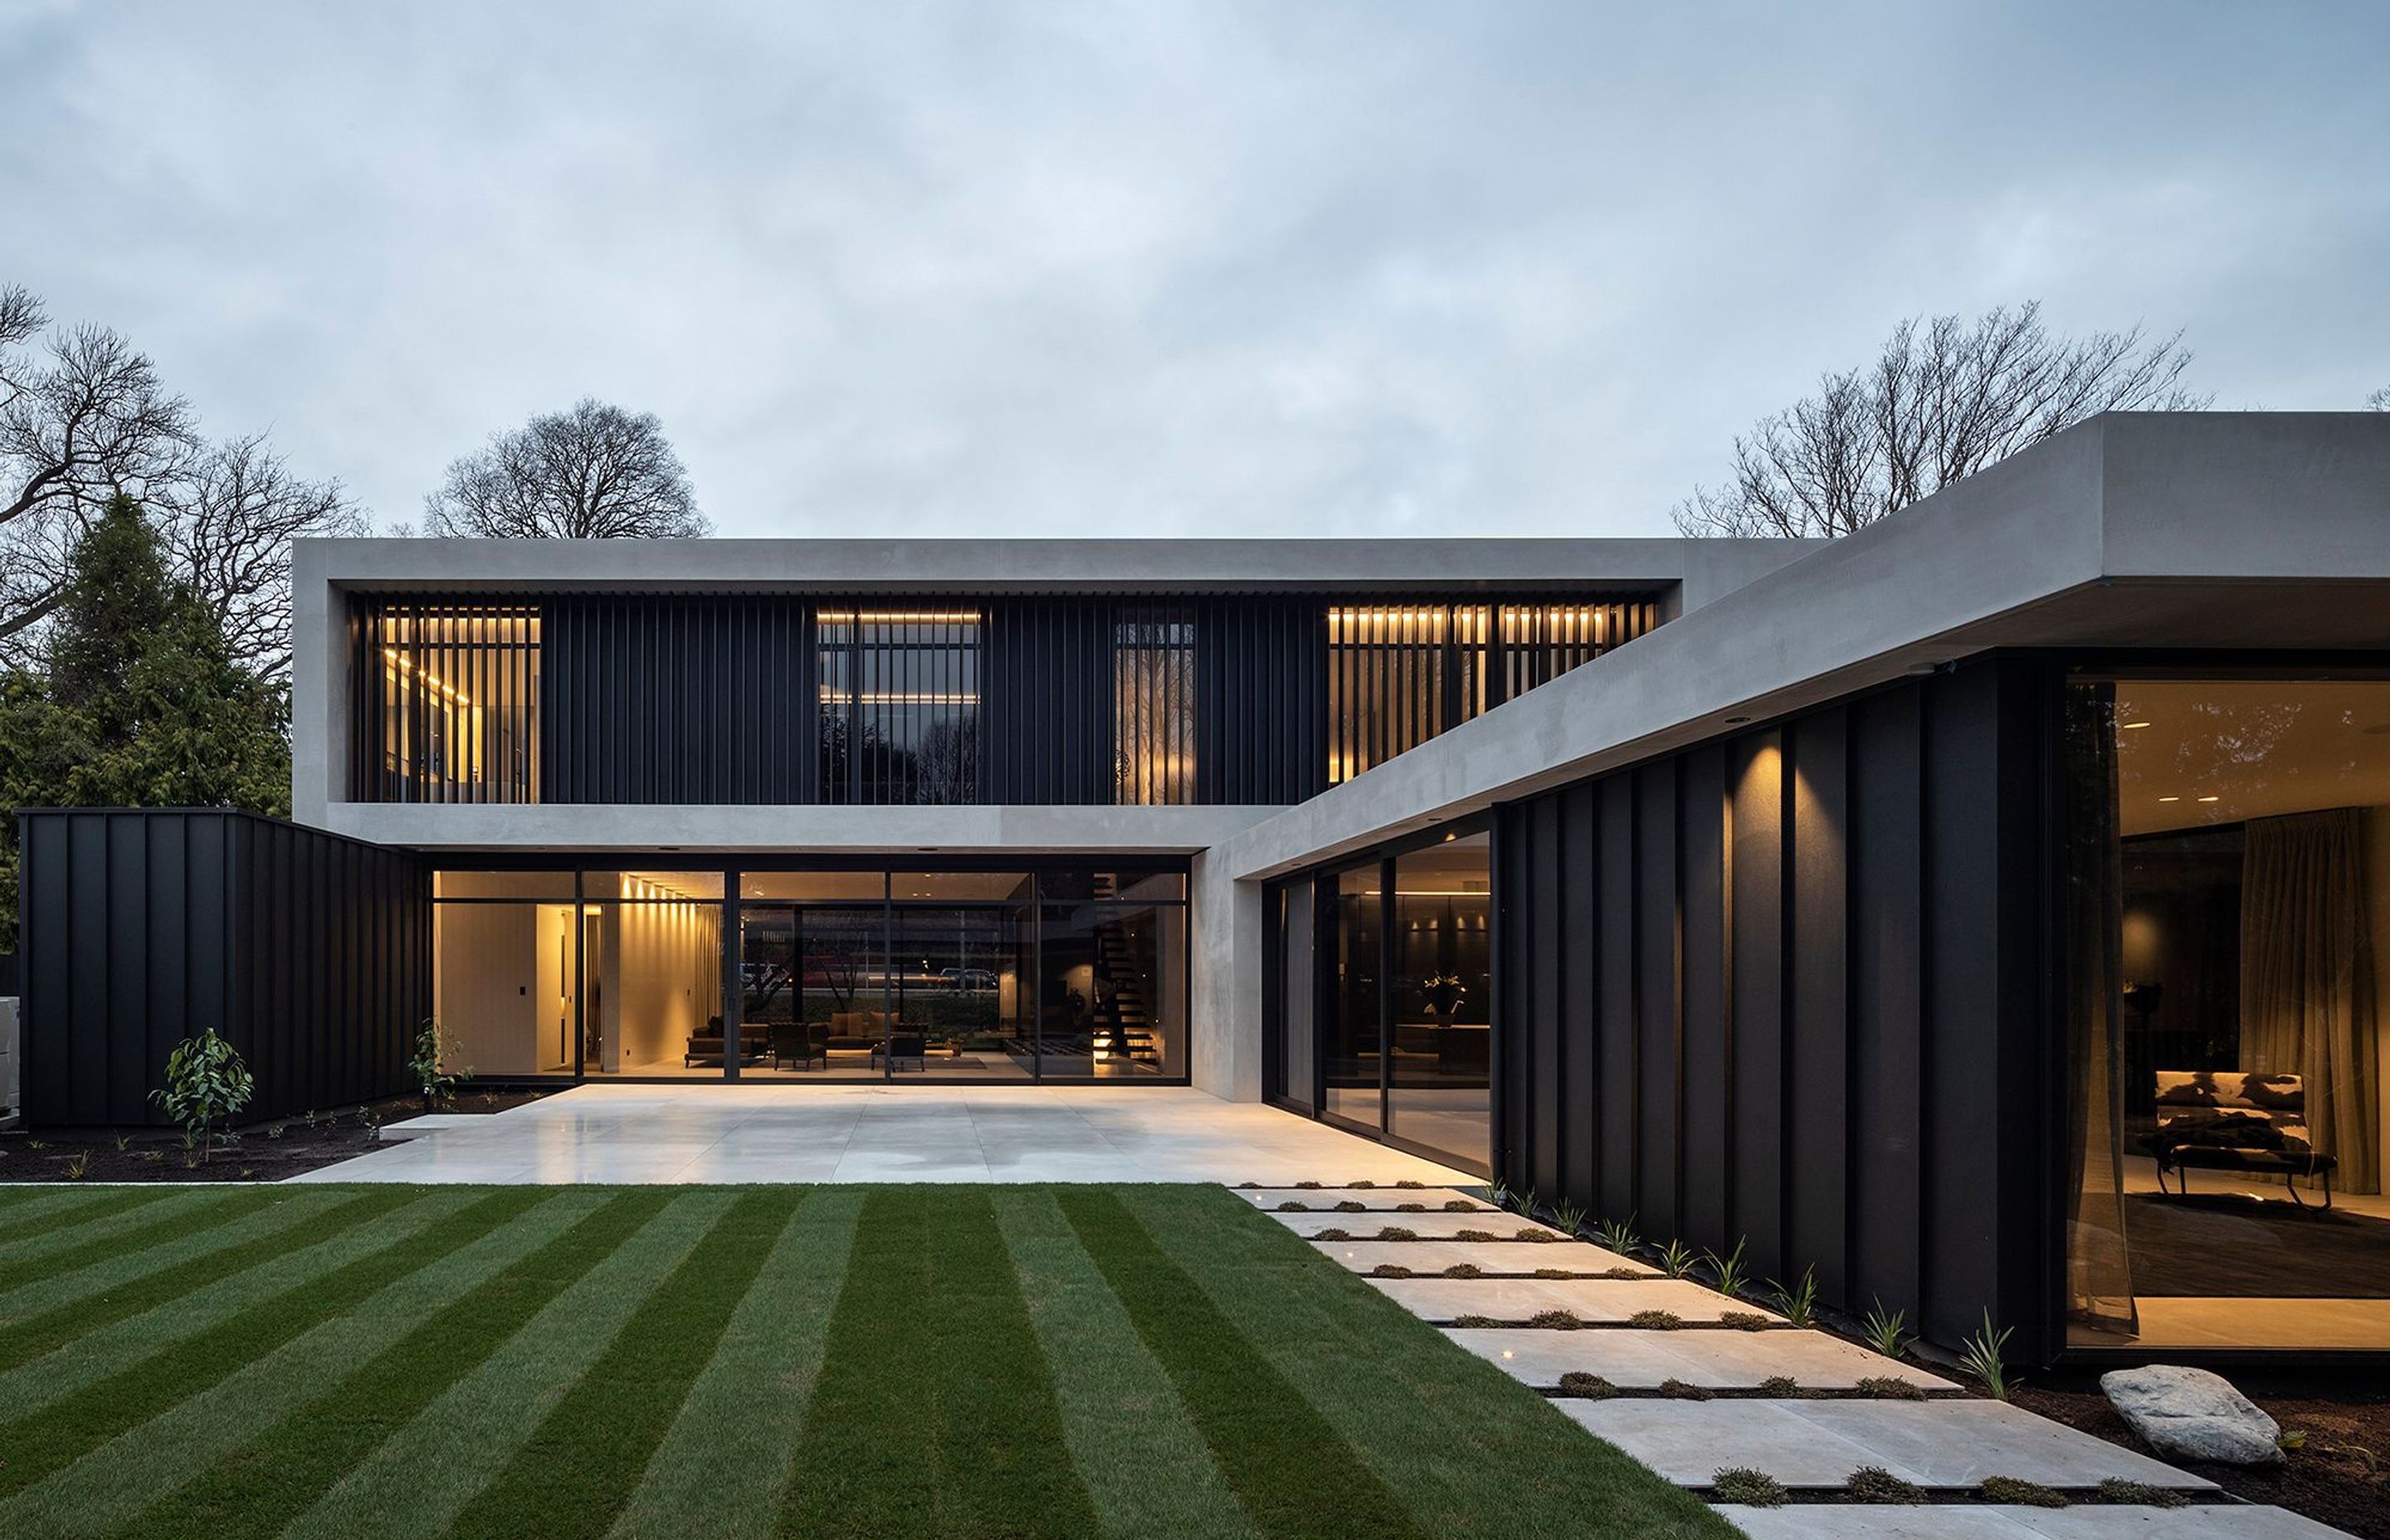 A series of interlinked, stacked forms creates a protected courtyard as well as a series of interconnected internal spaces.